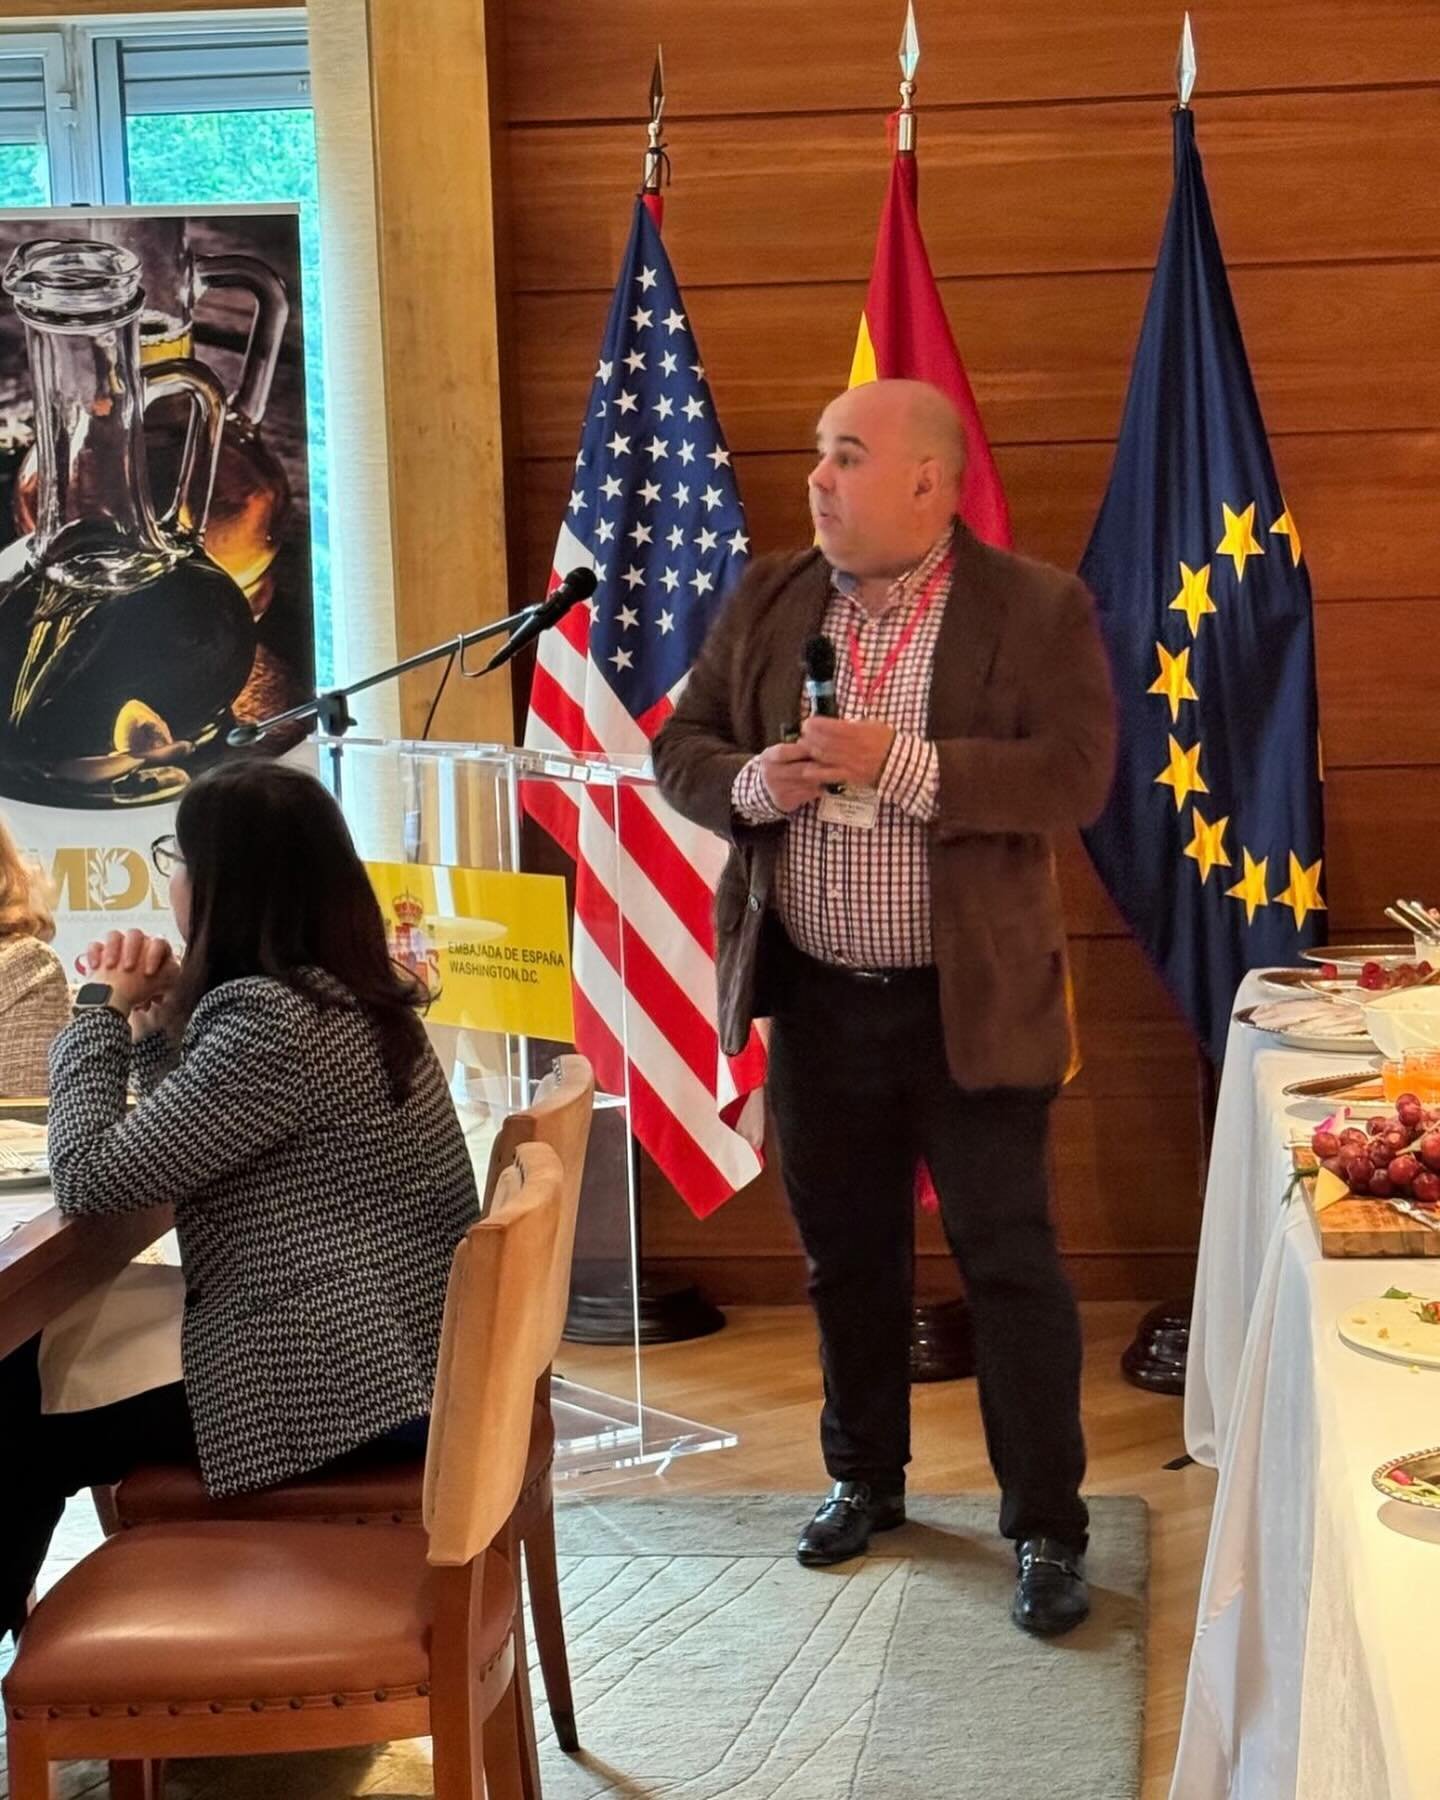 🥘The Commercial Policy Department of the Economic &amp; Trade Office of Spain in Washington D. C. had the honor of organizing this event alongside the  Mediterranean Diet Roundtable MDR on the virtues and health benefits of the #MediterraneanDiet an